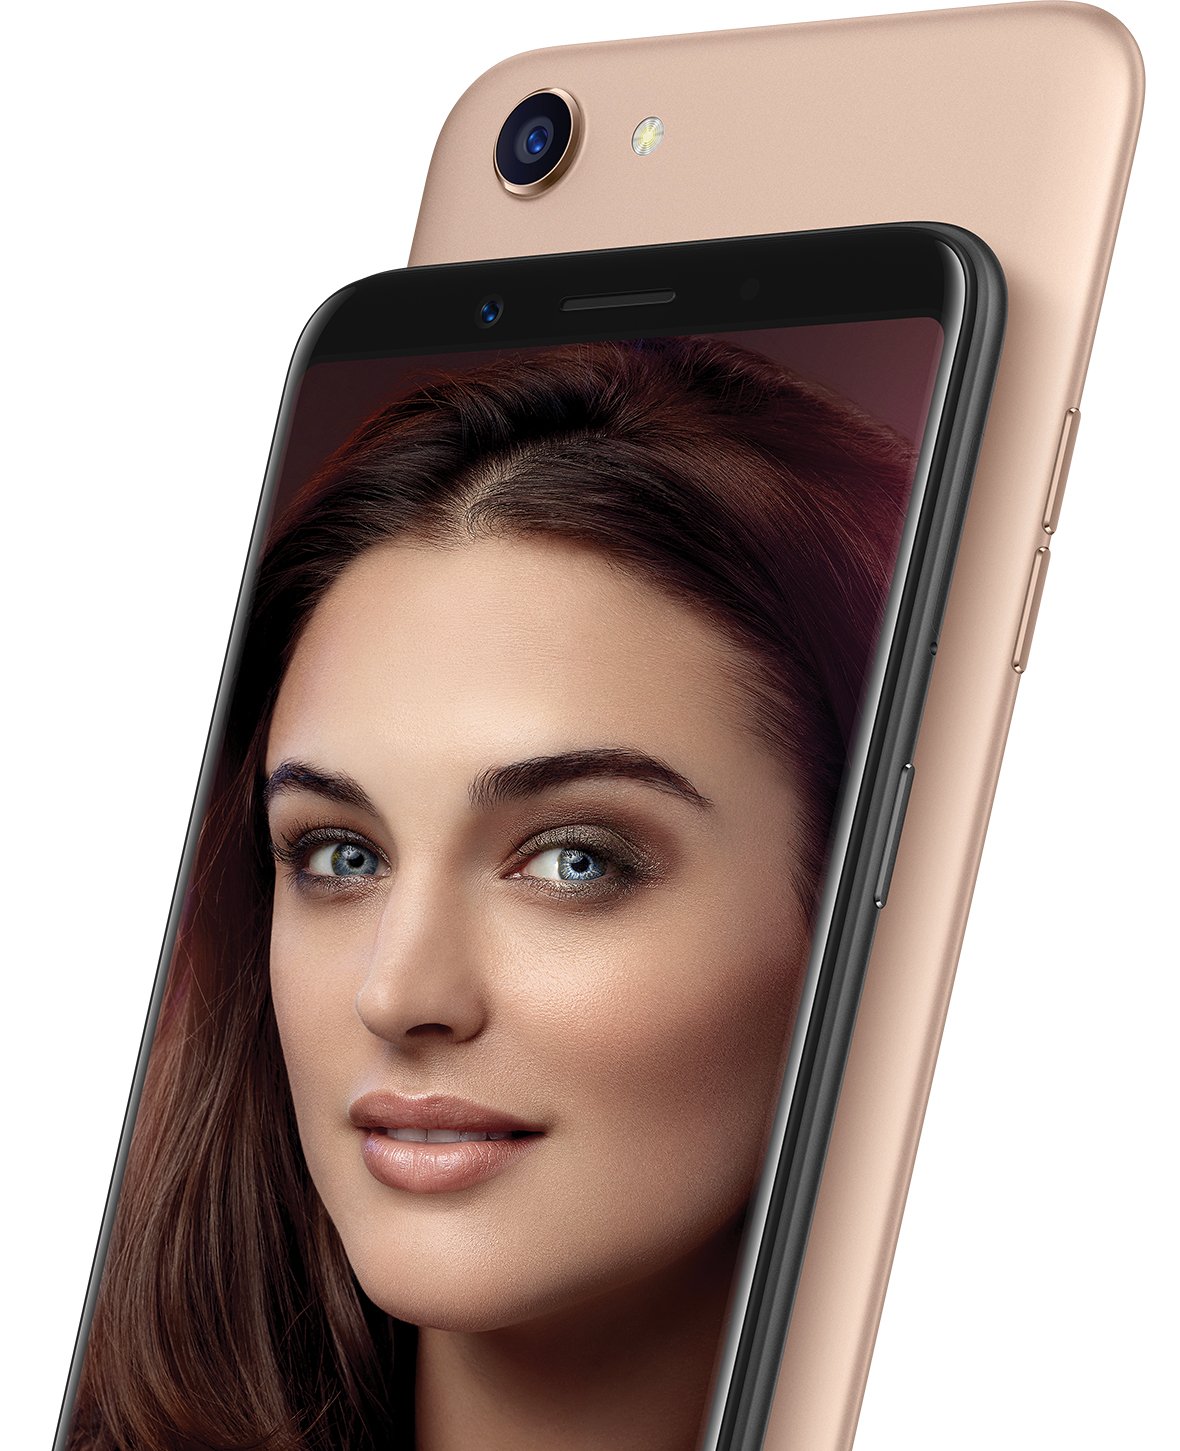 OPPO F5 Youth cameras